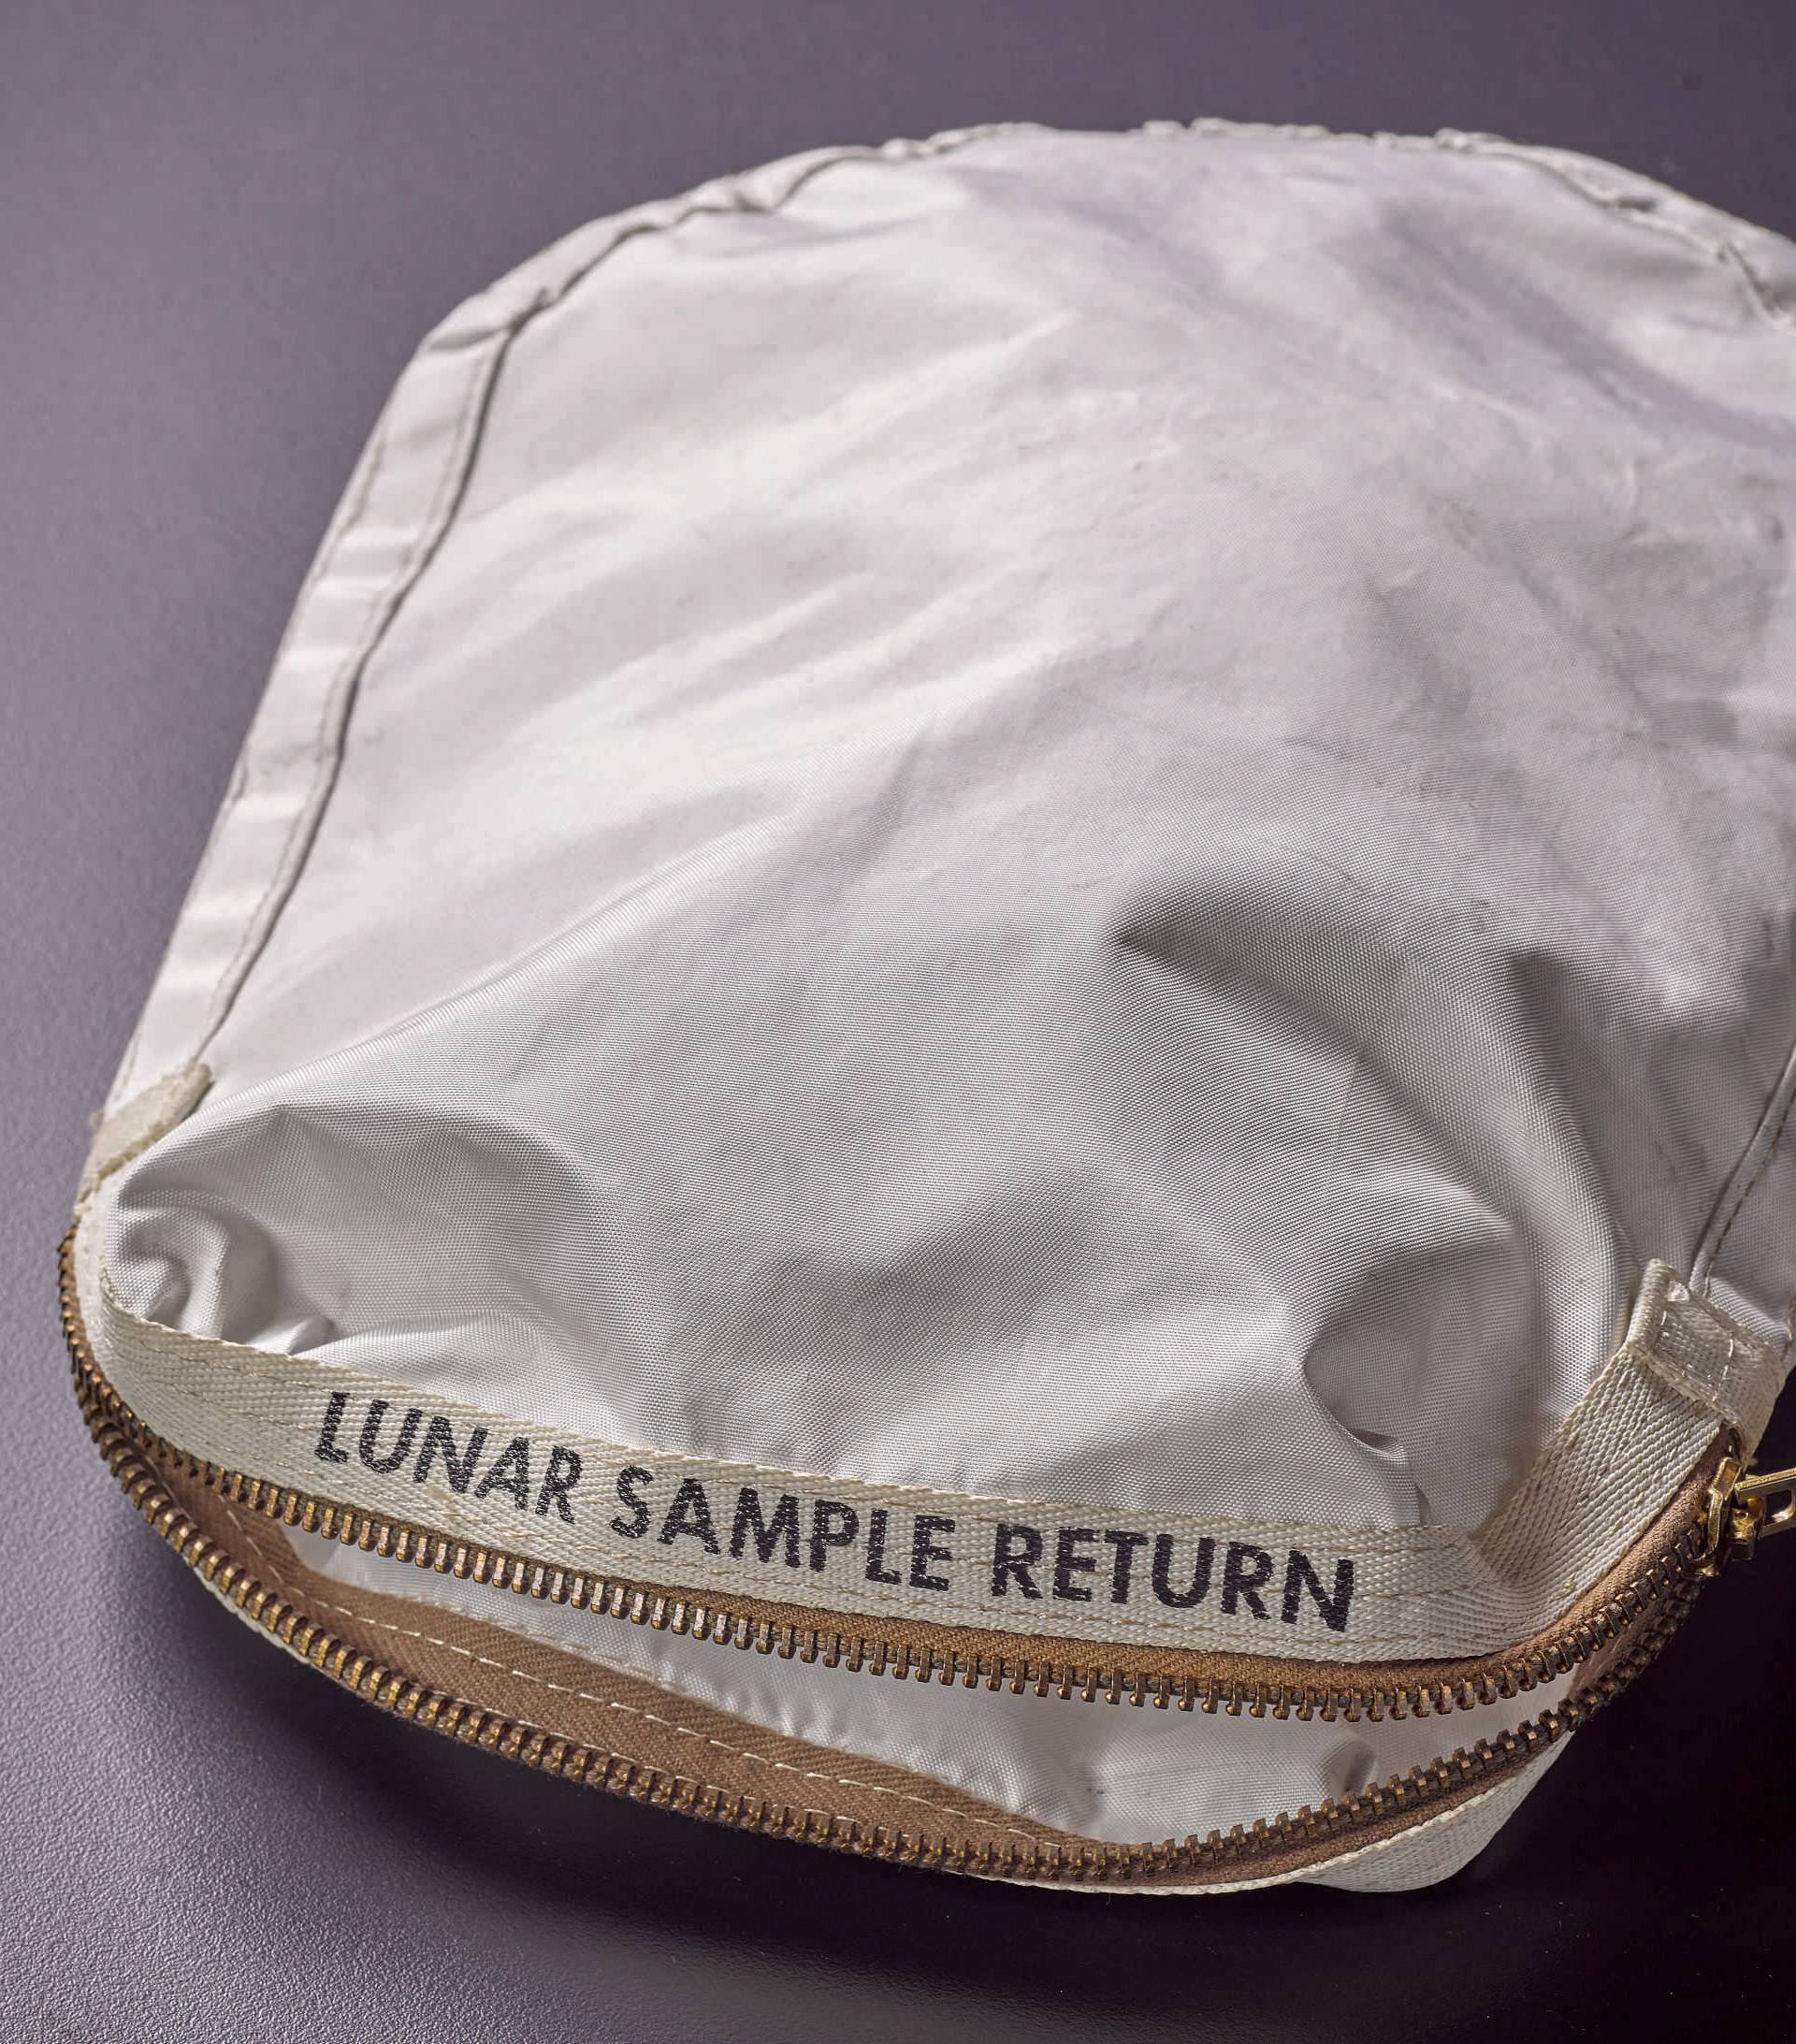 Apollo 11 Contingency Lunar Sample Return Bag used by astronaut Neil Armstrong is seen in an auction house photo